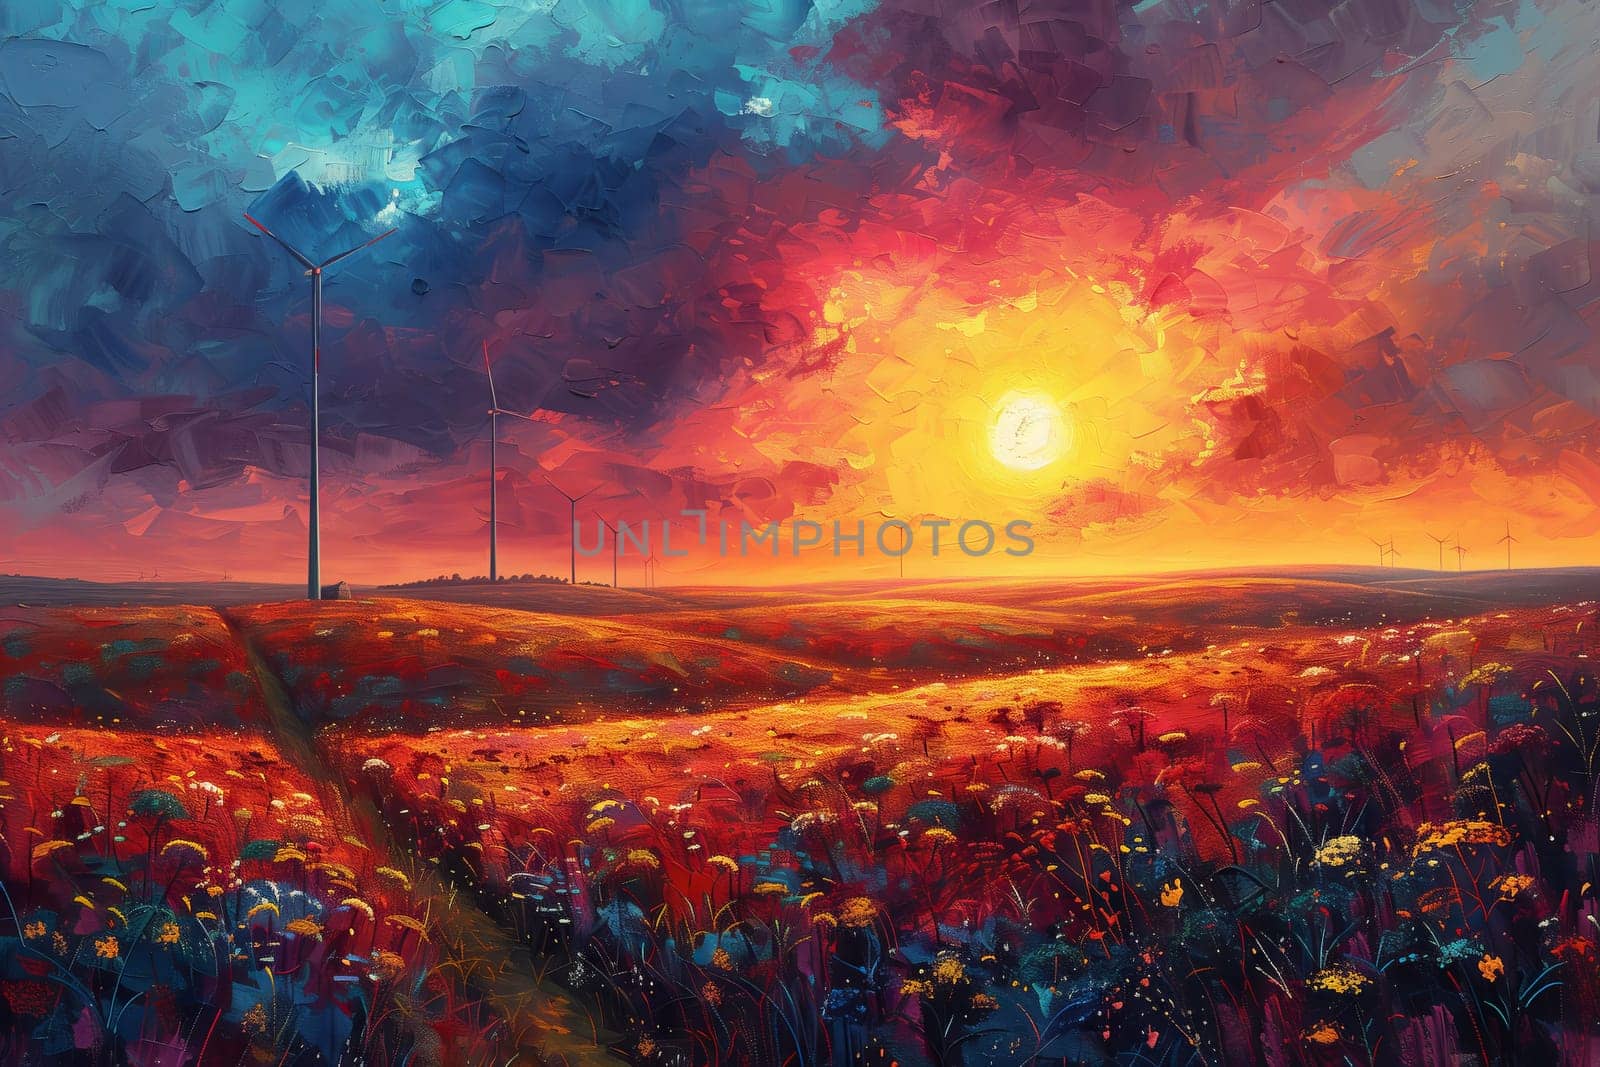 An art piece depicting a grassland with colorful flowers under a sunset sky by richwolf